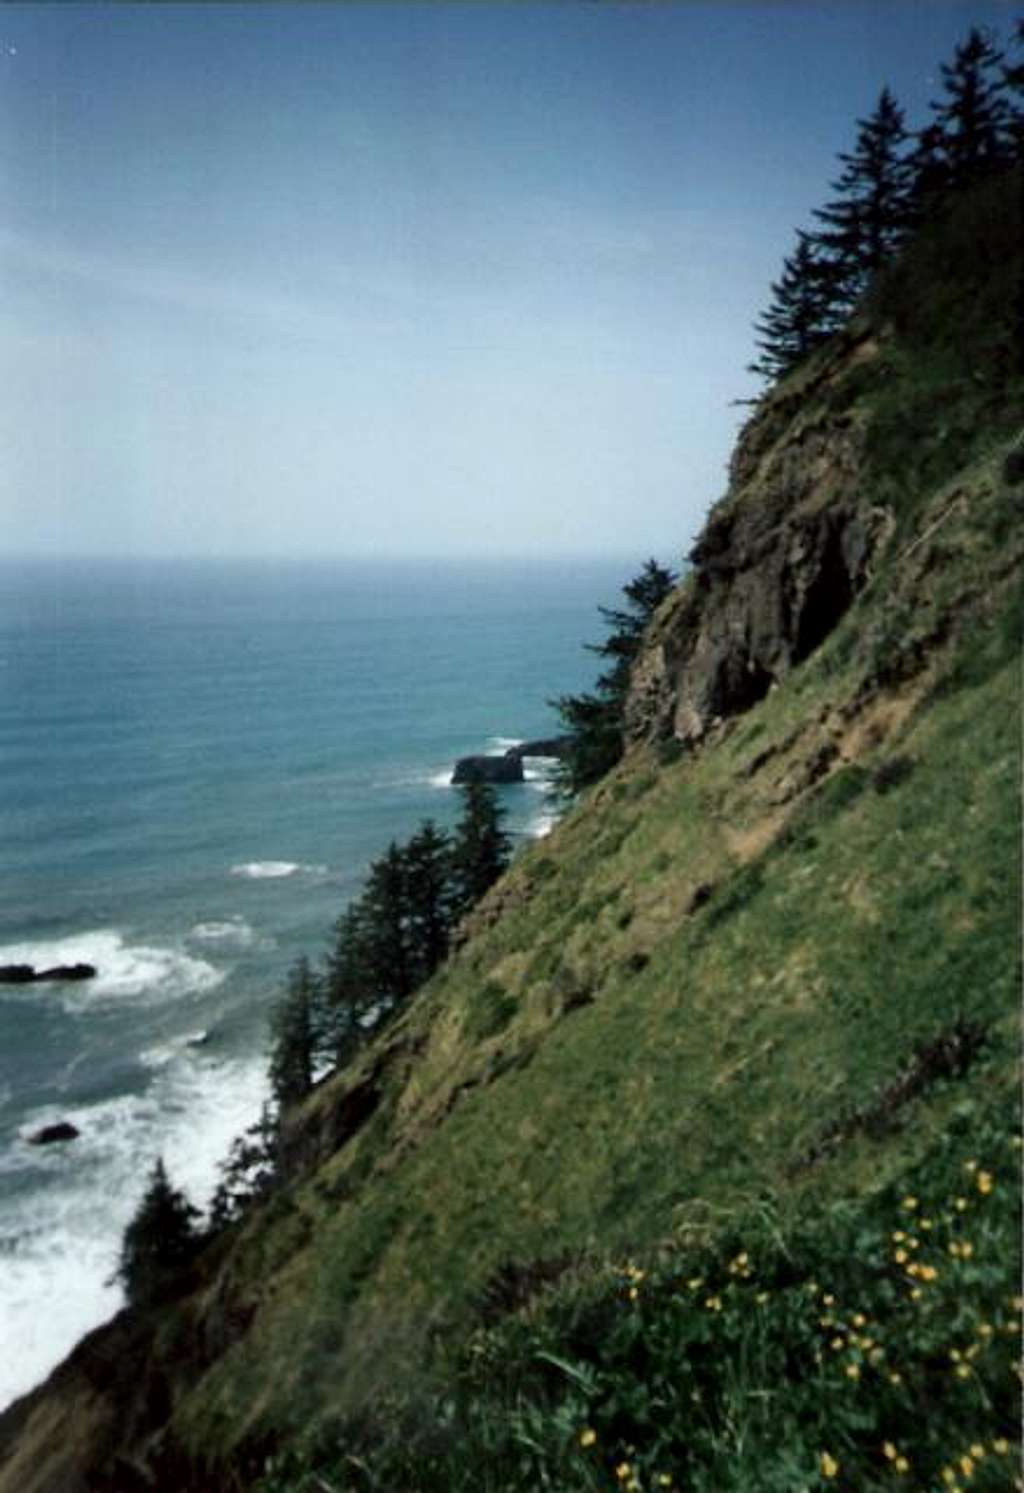 Looking north from Cascade Head